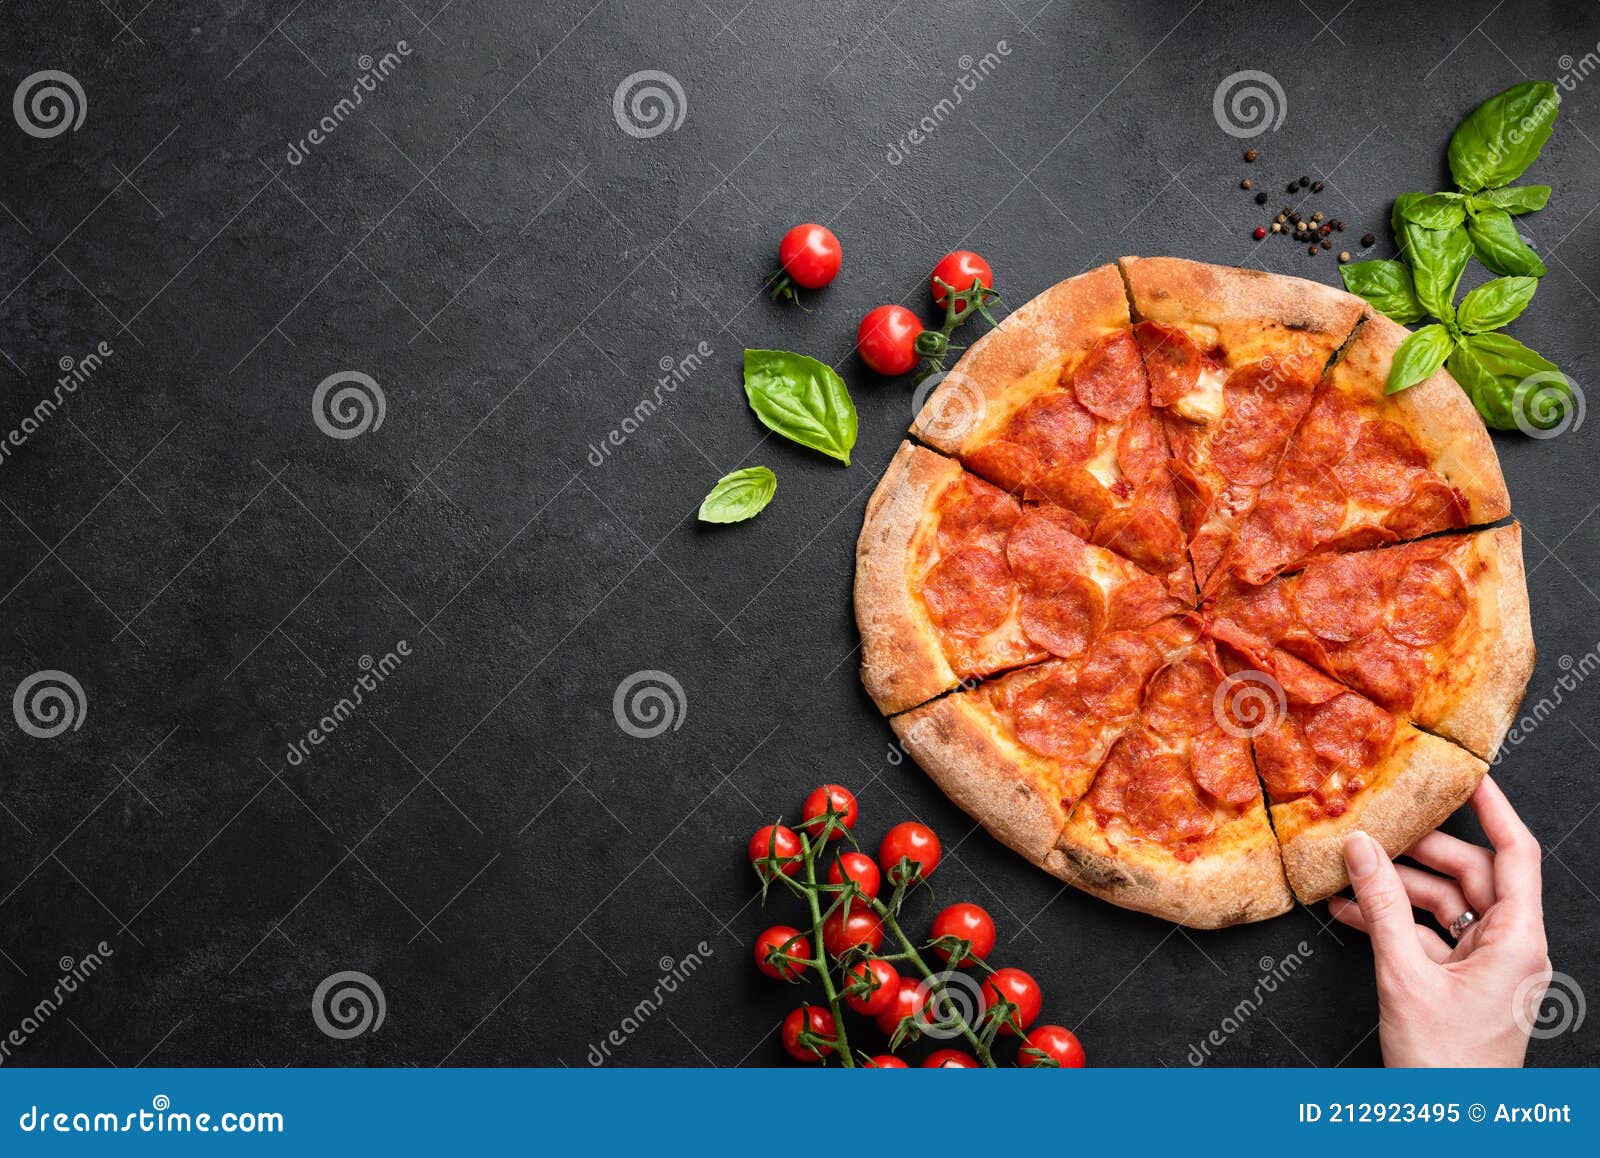 Hand Taking Slice Of Pepperoni Pizza Stock Image Image Of Concrete